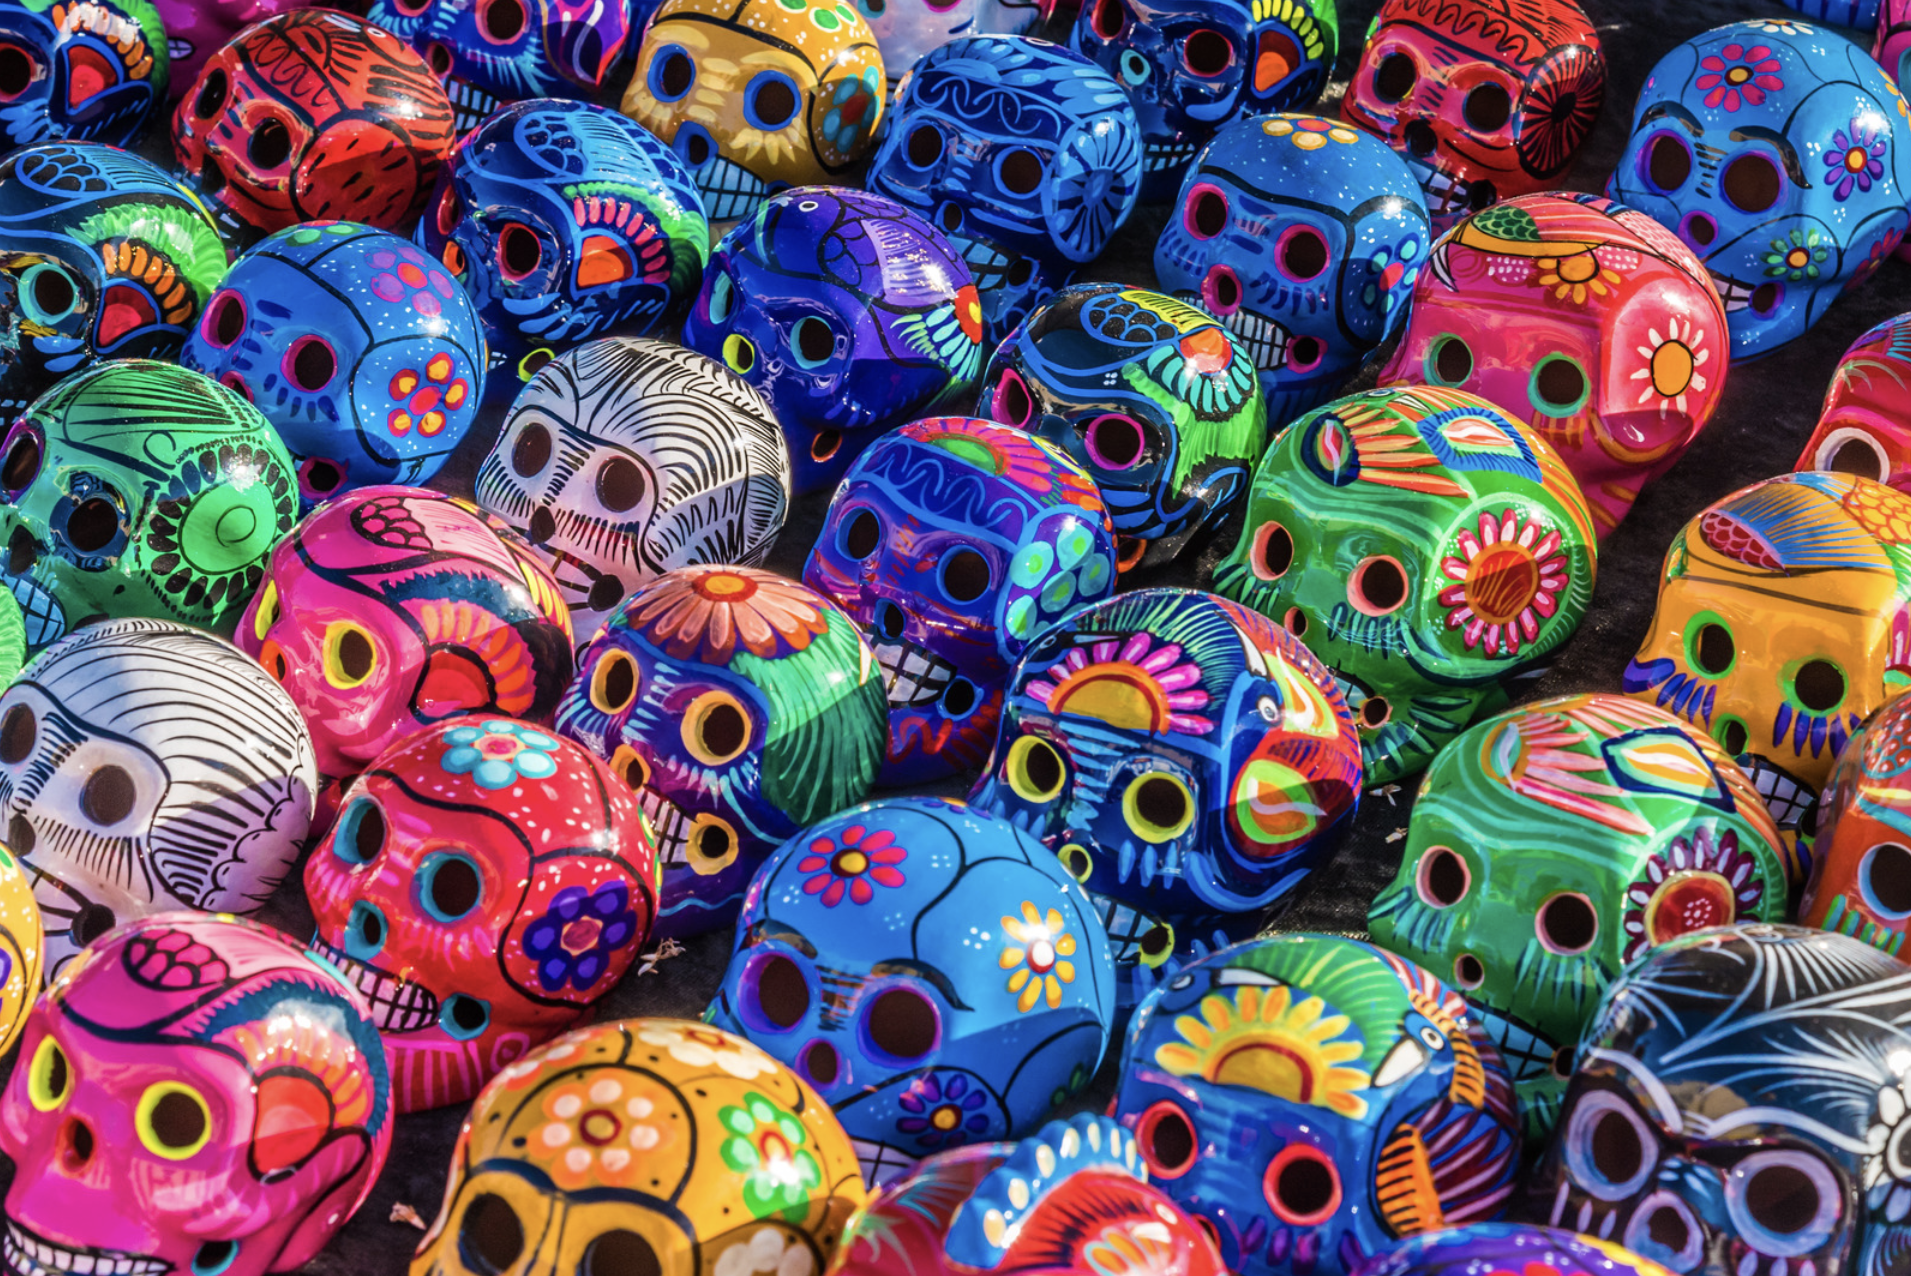 Colorful painted skulls at a festival